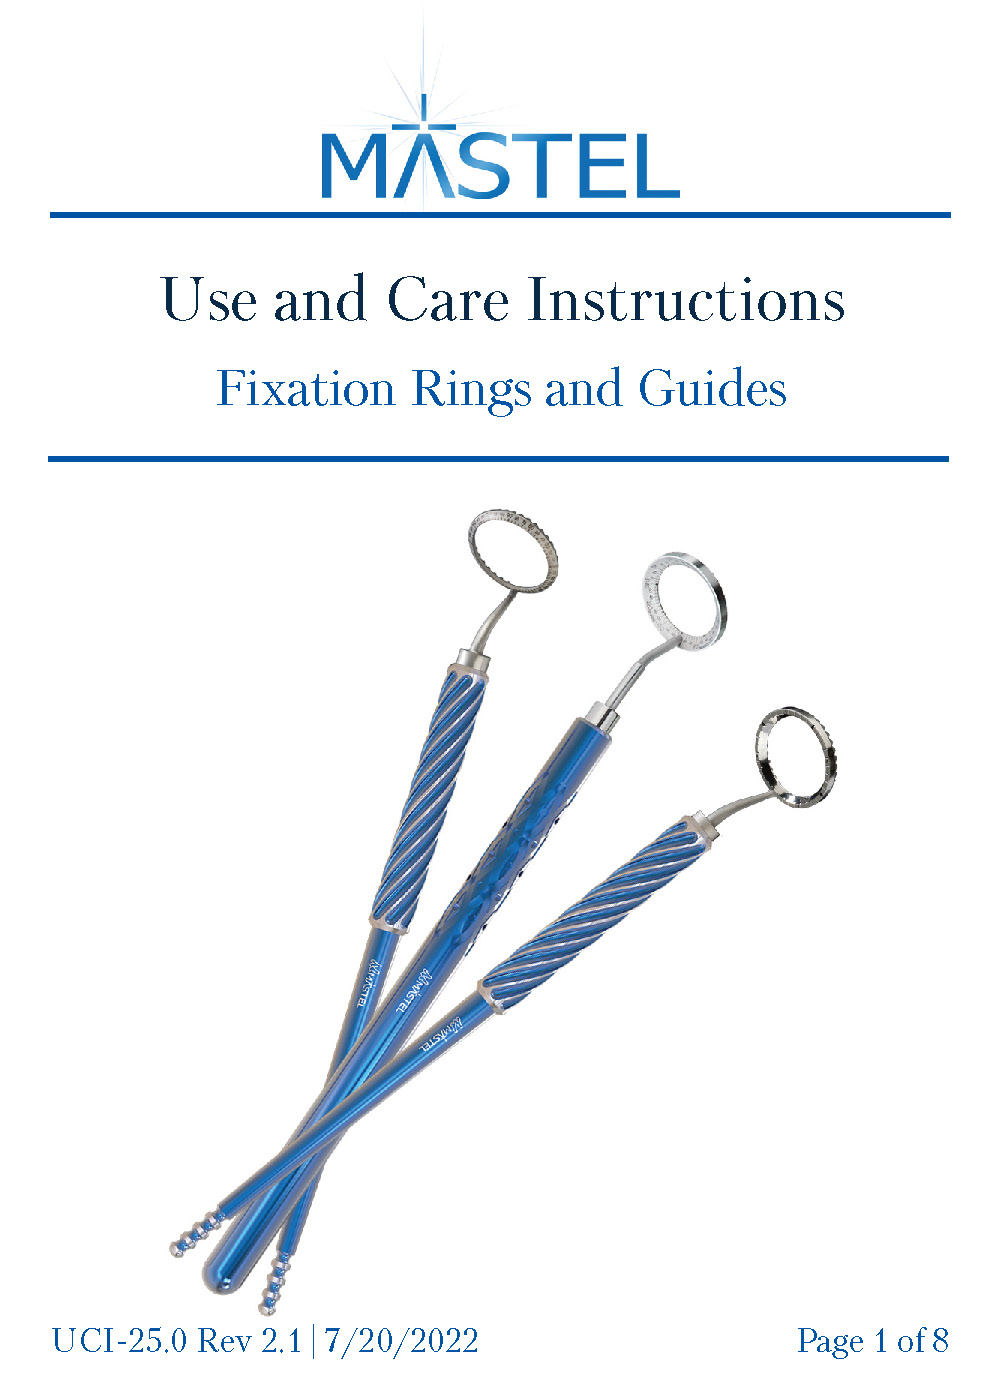 Fixation Rings / Guides